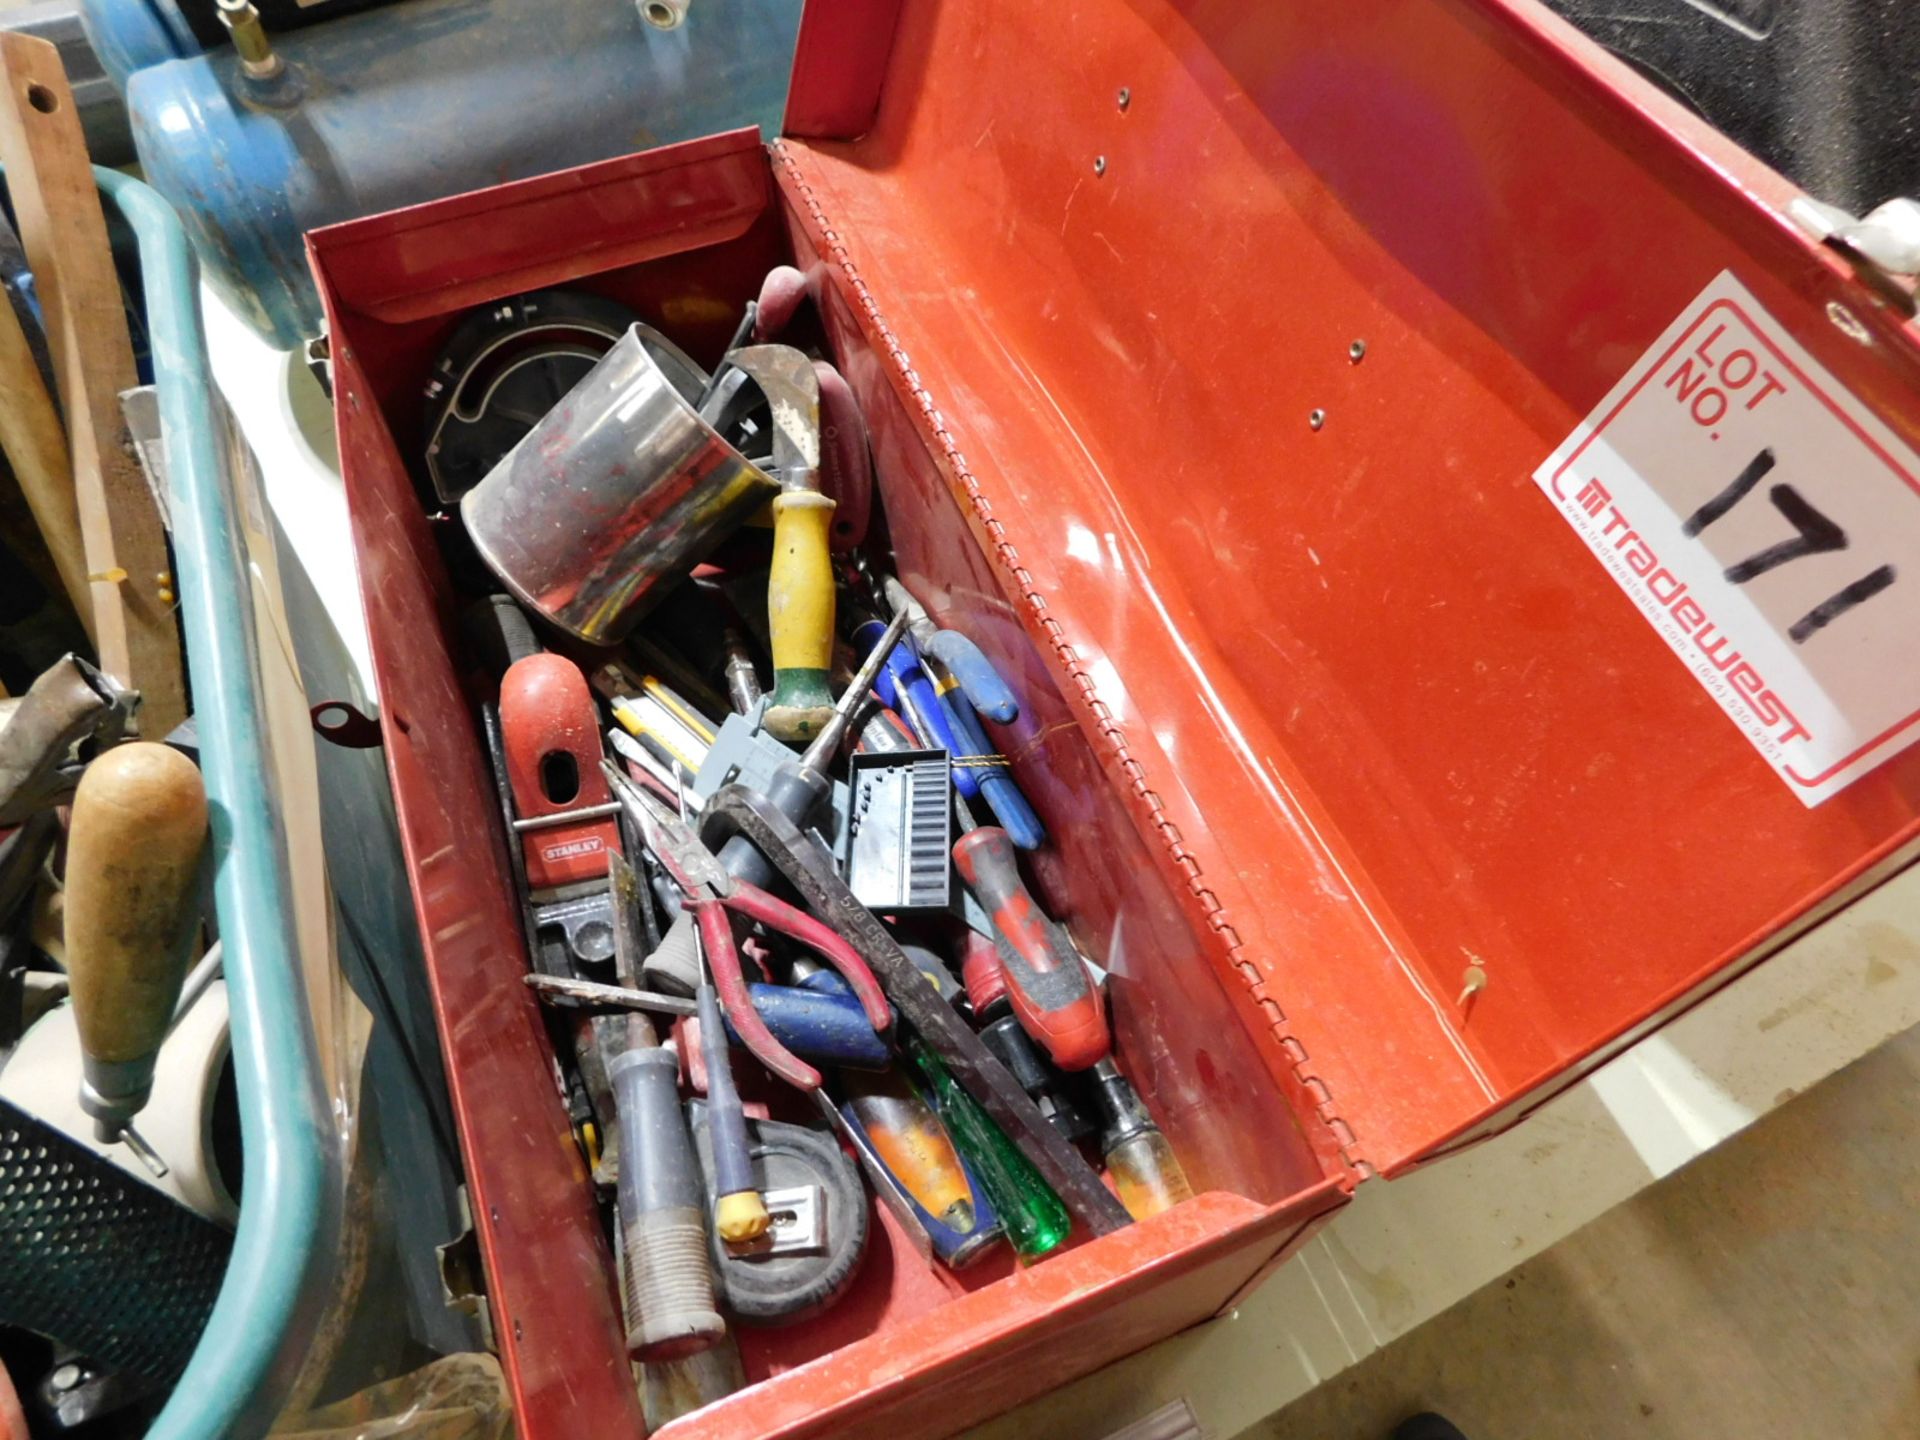 BOX OF ASSORTED TOOLS